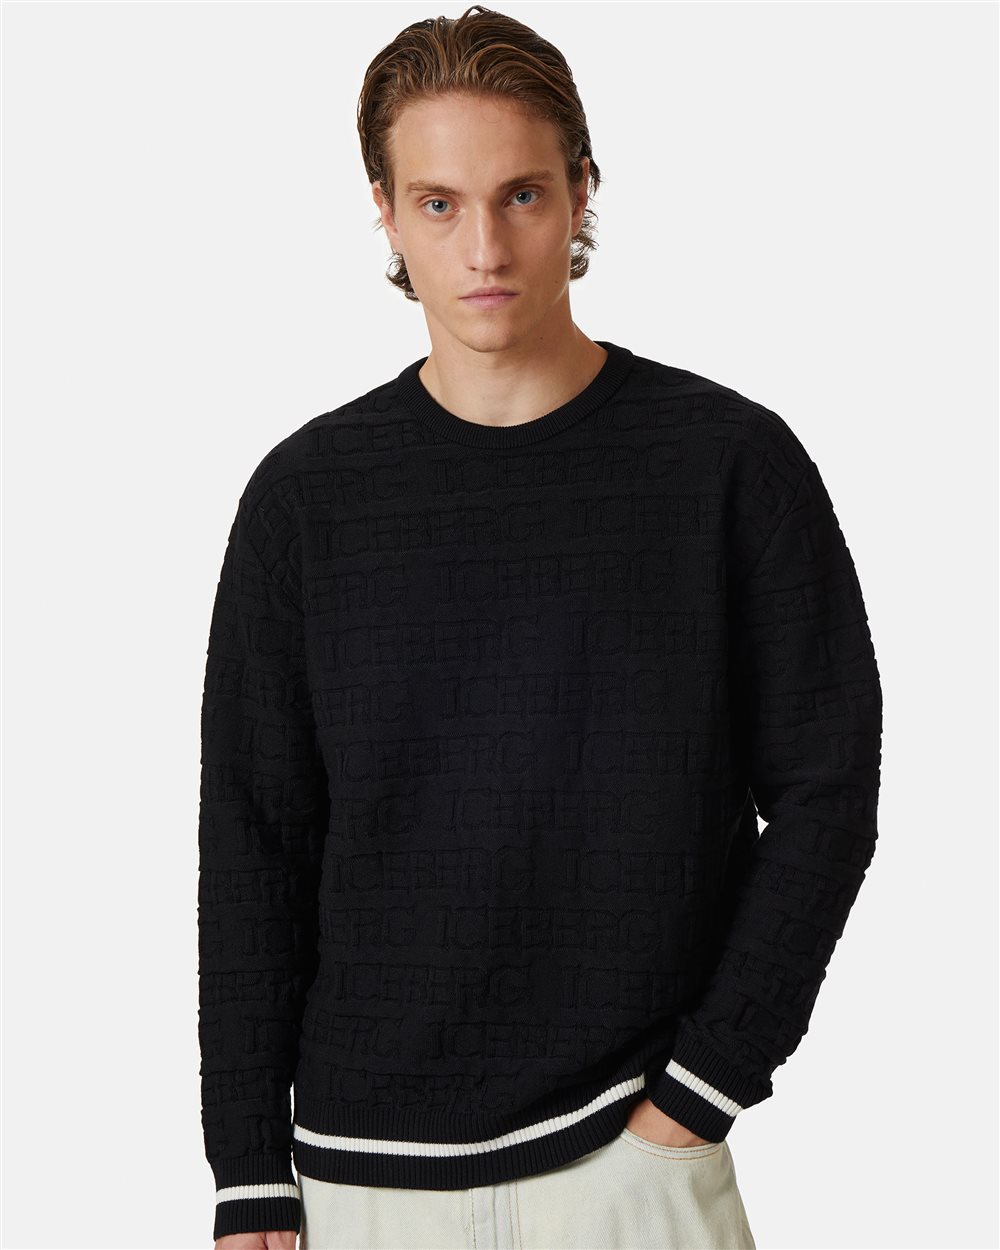 Black sweater with allover logo - Iceberg - Official Website